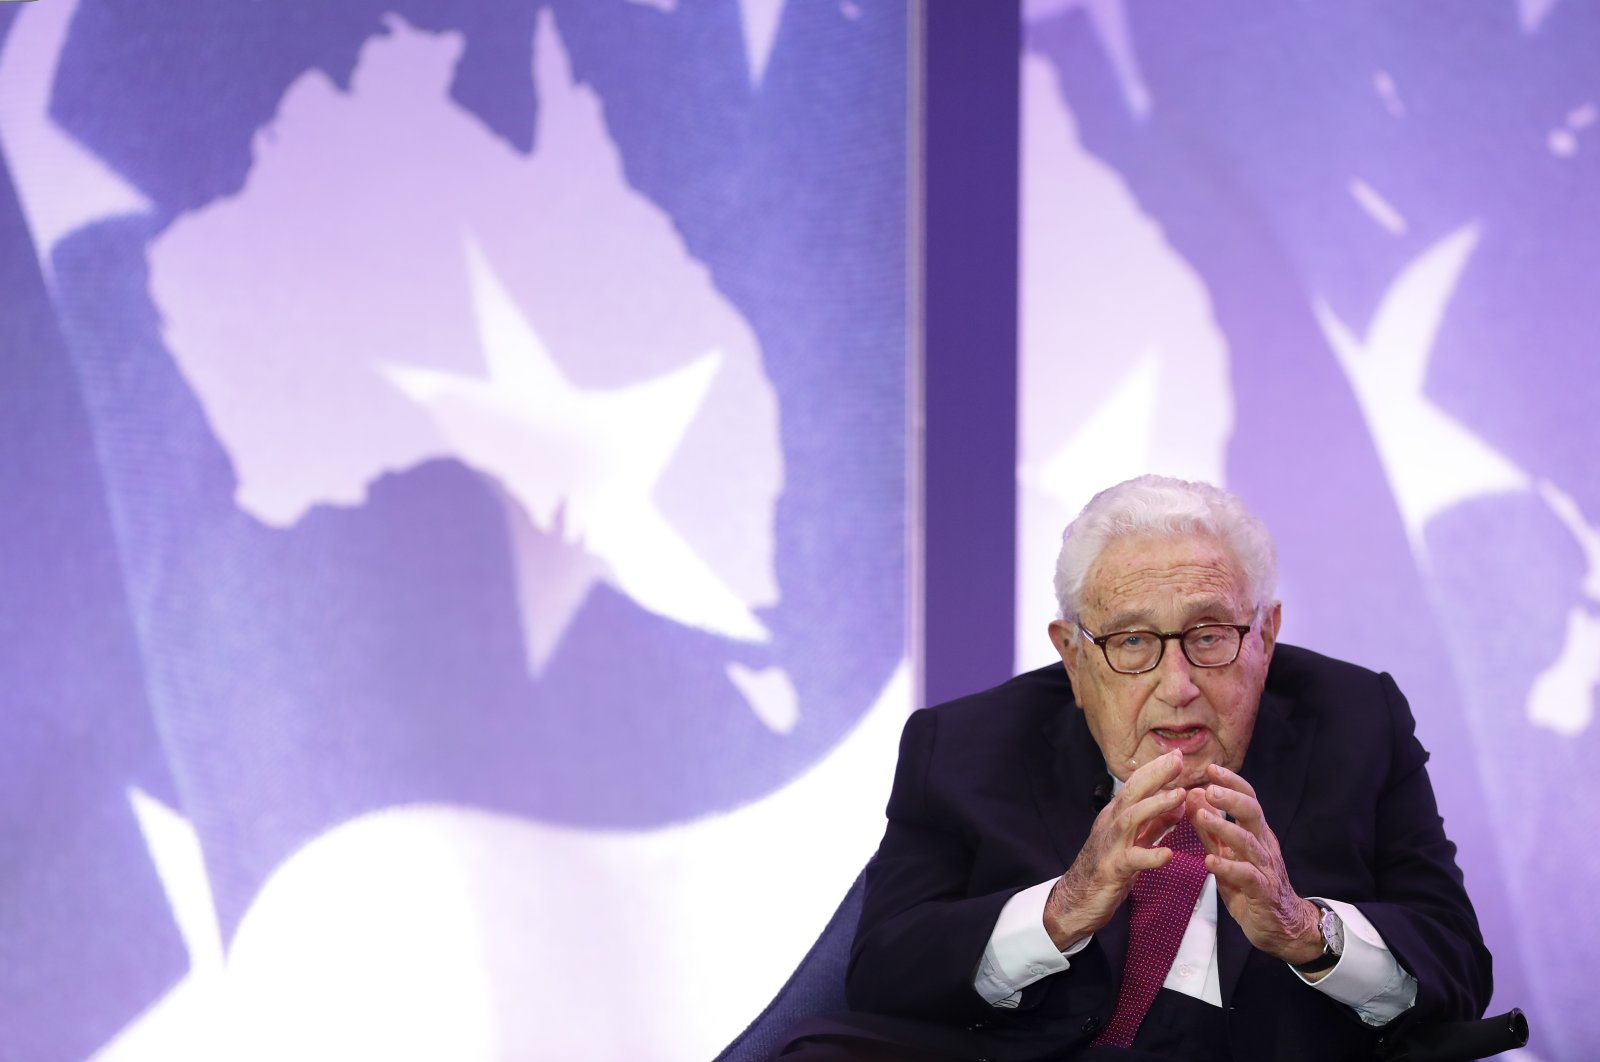 Former Secretary of State Henry Kissinger speaks during the Department of State 230th Anniversary Celebration at the Harry S. Truman Headquarters building, in Washington, DC, U.S., July 29, 2019. (Getty Images Photo)